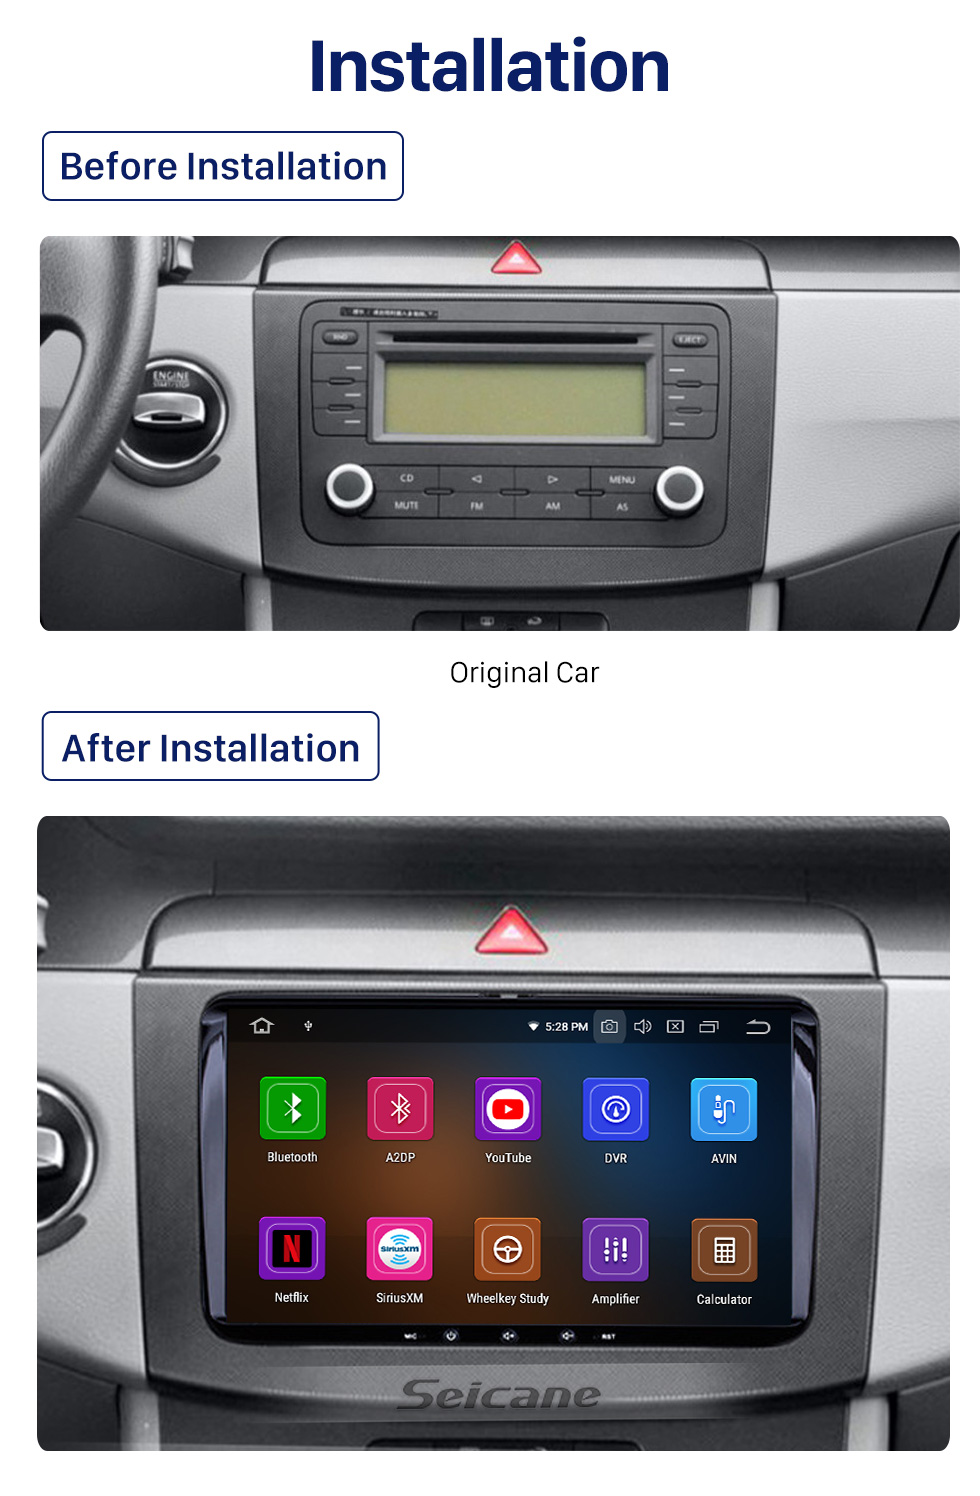 Seicane Aftermarket Android 10.0 GPS DVD Player Car Audio System for VW Volkswagen Universal SKODA Seat with Mirror Link OBD2 DVR 3G WiFi Radio Backup Camera HD touch Screen Bluetooth